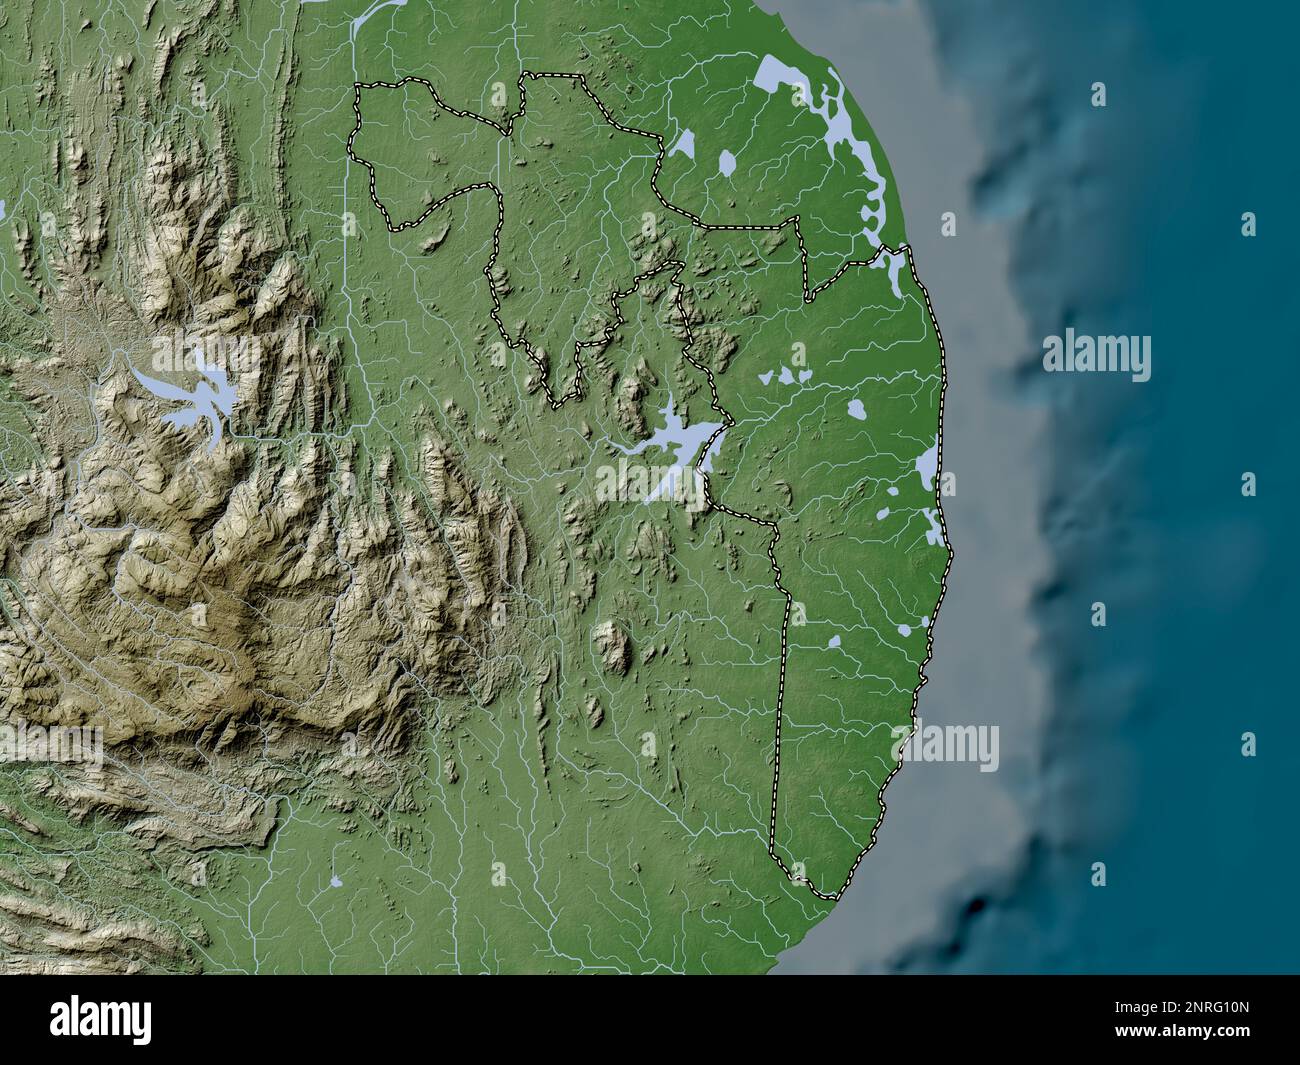 Ampara District Of Sri Lanka Elevation Map Colored In Wiki Style With Lakes And Rivers 2NRG10N 